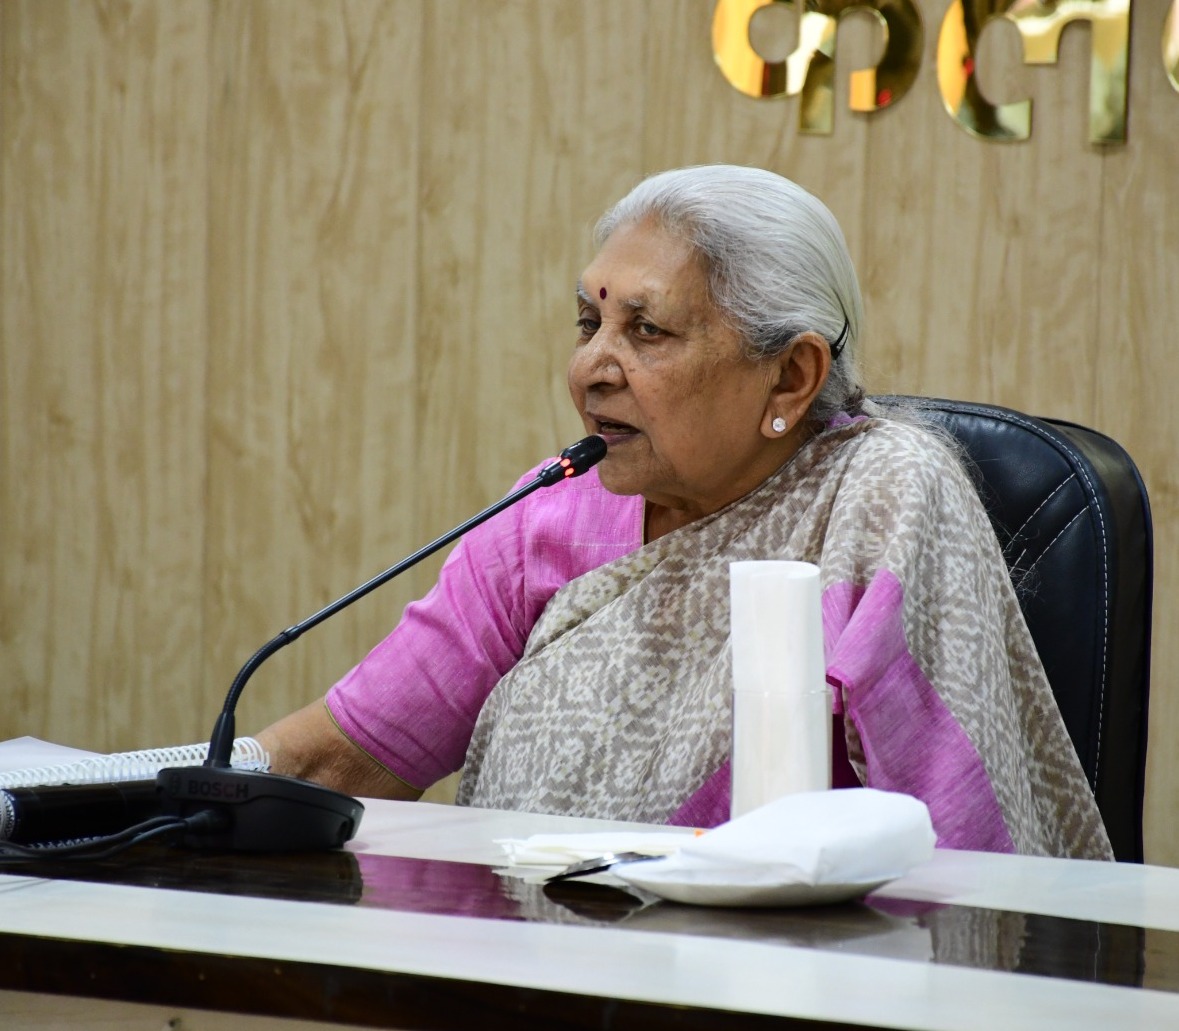 Effective steps should be taken to provide employment oriented education in universities - Governor Anandiben Patel